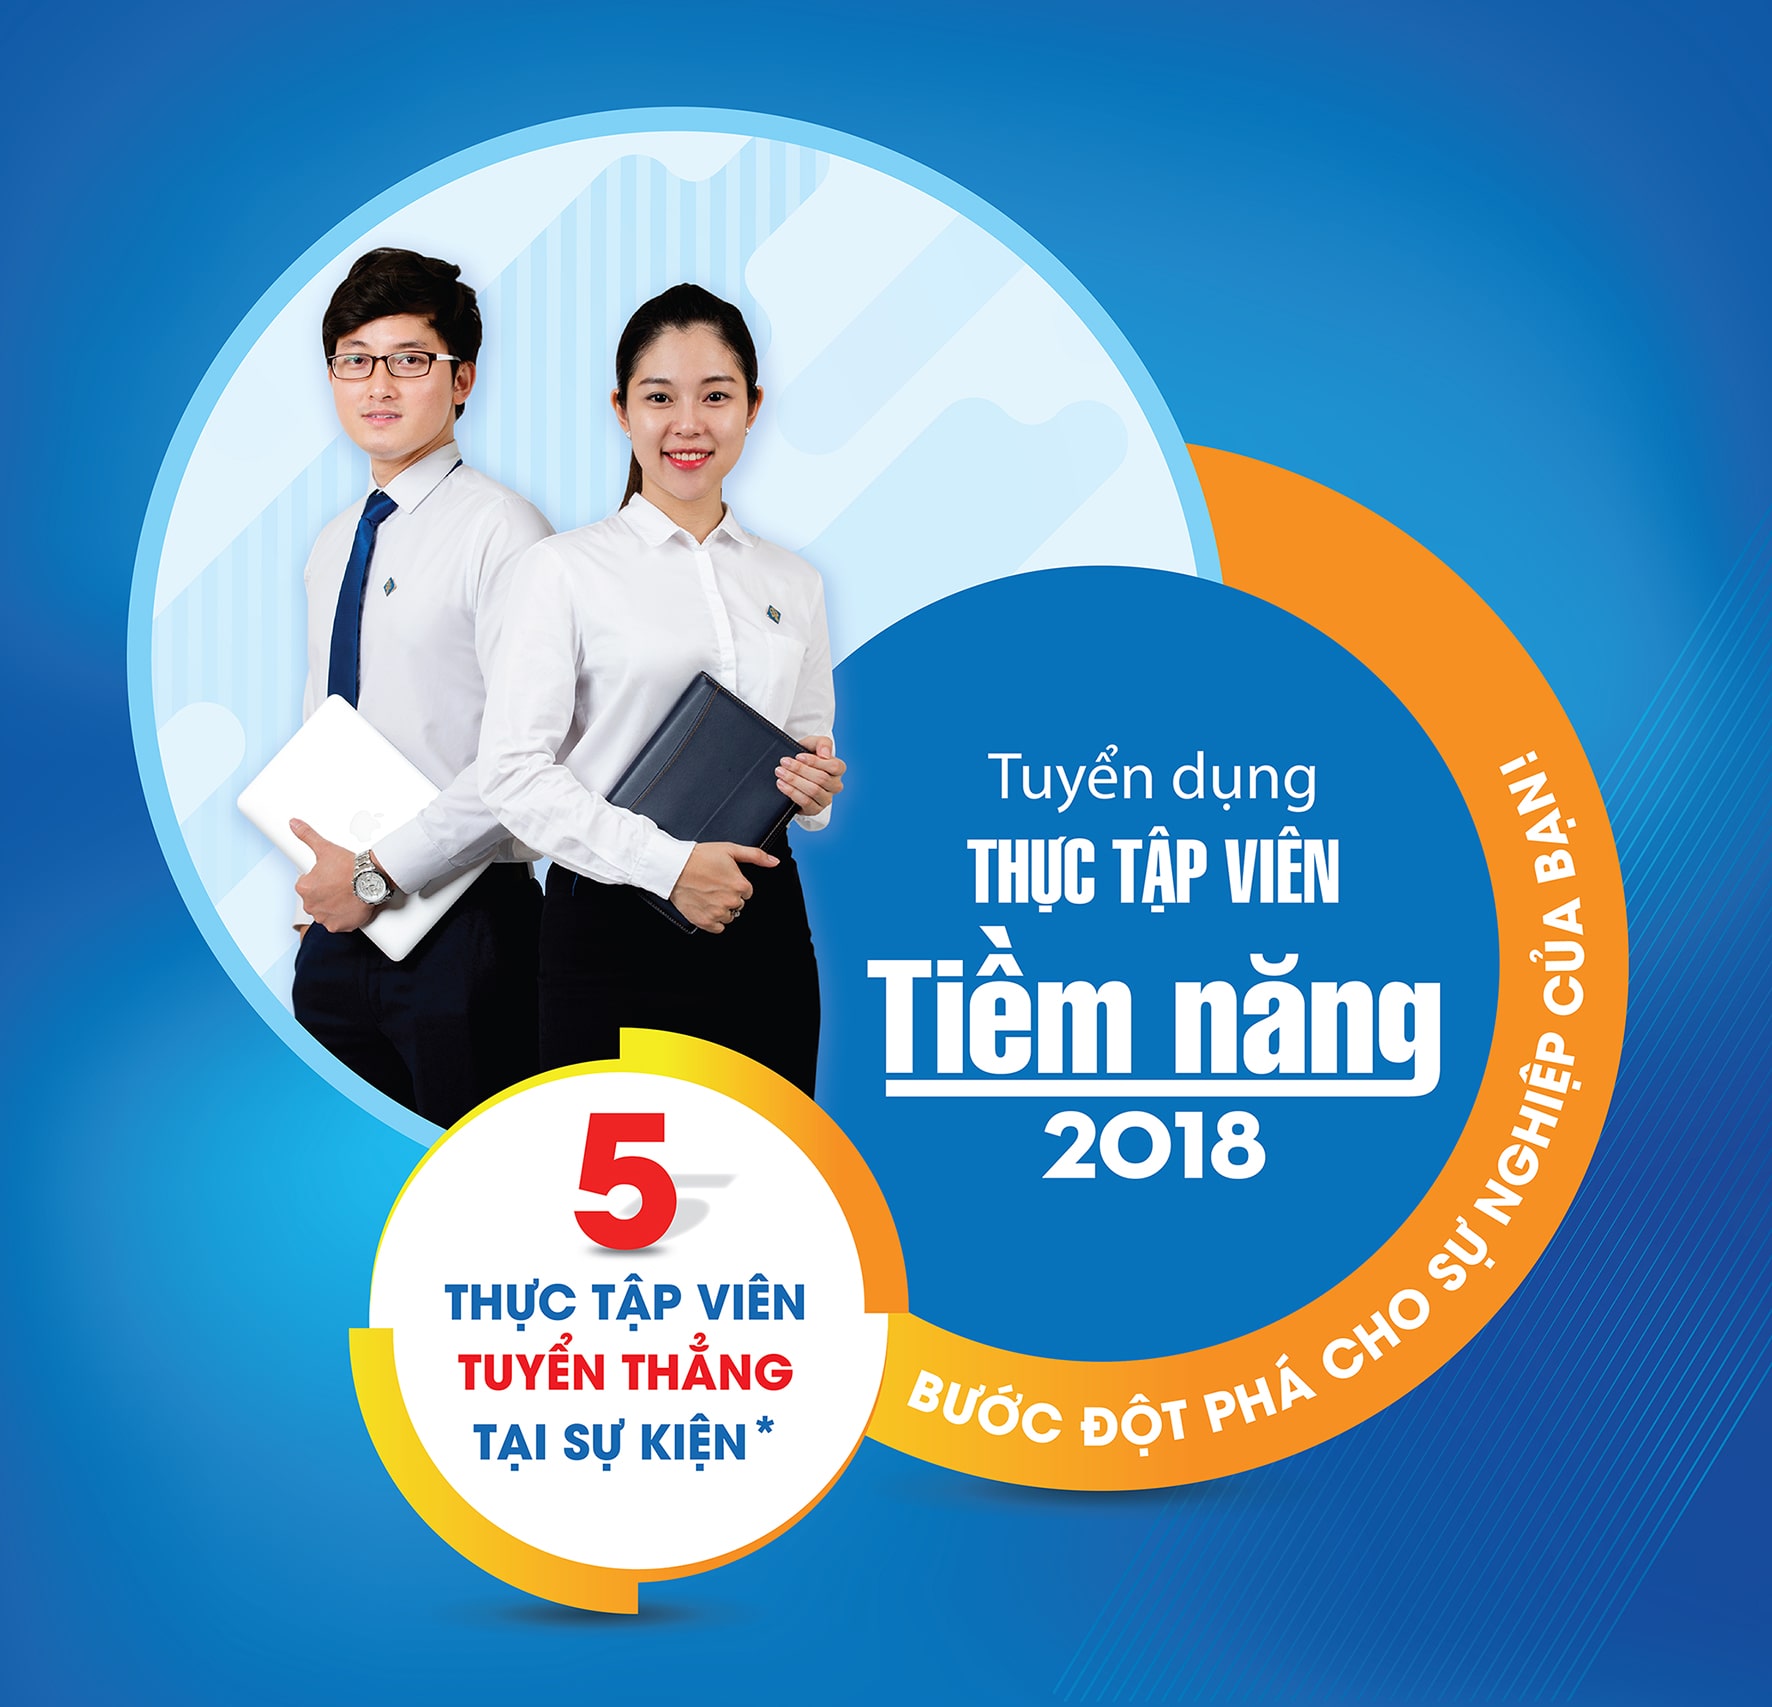 Find perfect Nền banner đẹp for your promotional material